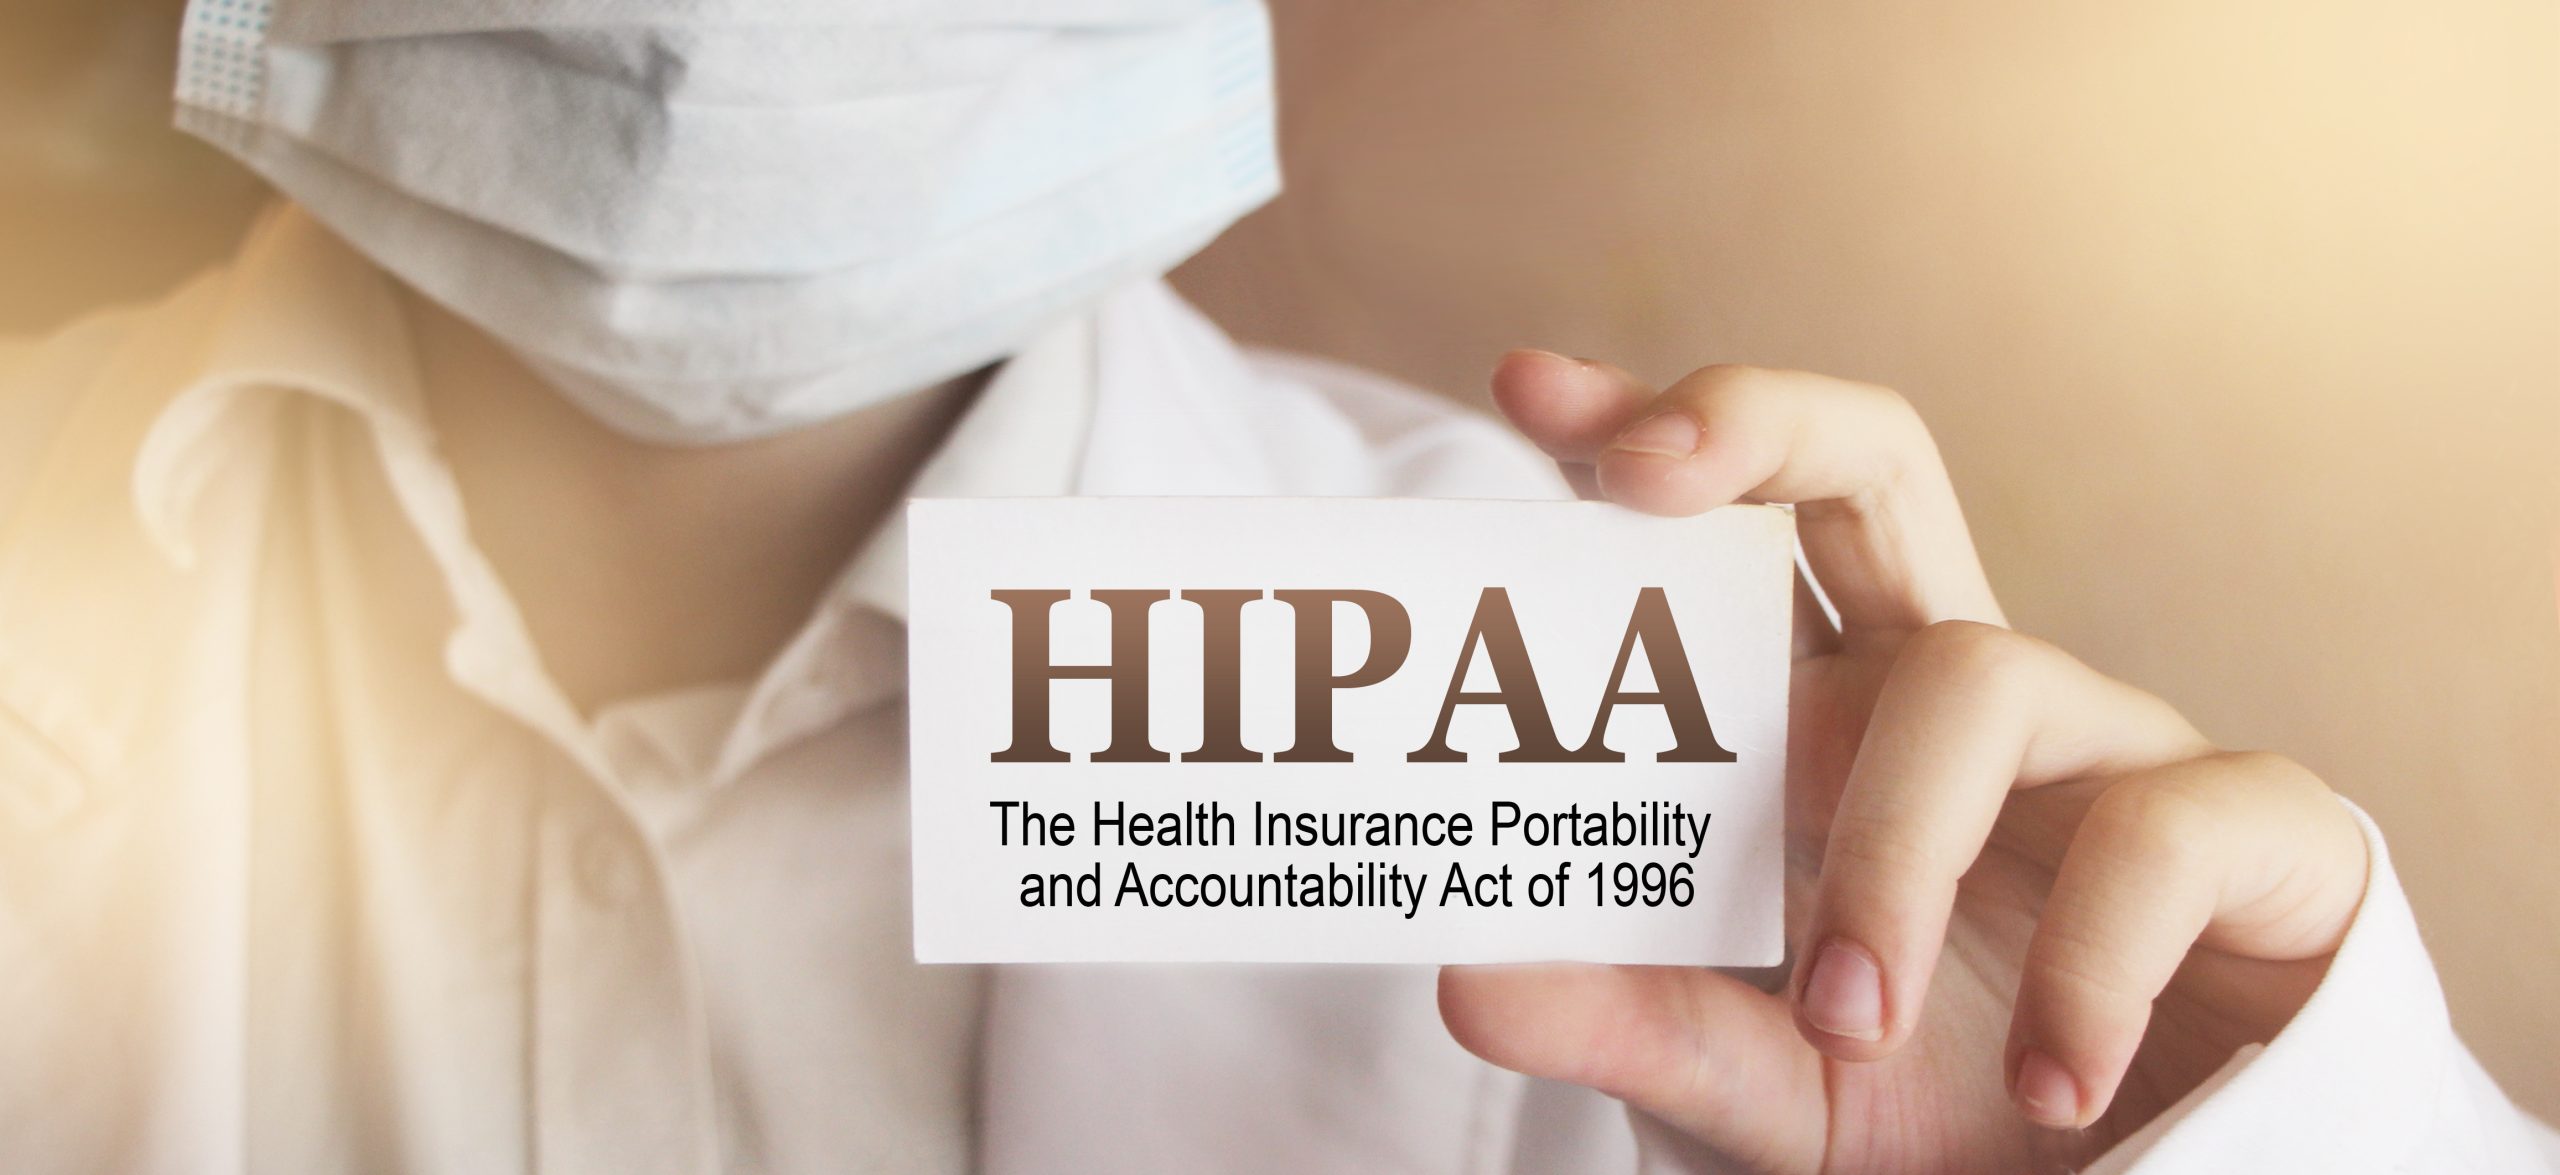 photo of a person wearing a surgical mask displaying a business card with 'HIPAA' written on it, symbolizing the barriers created by HIPAA for families trying to access confidential medical information of their loved ones with severe mental illness